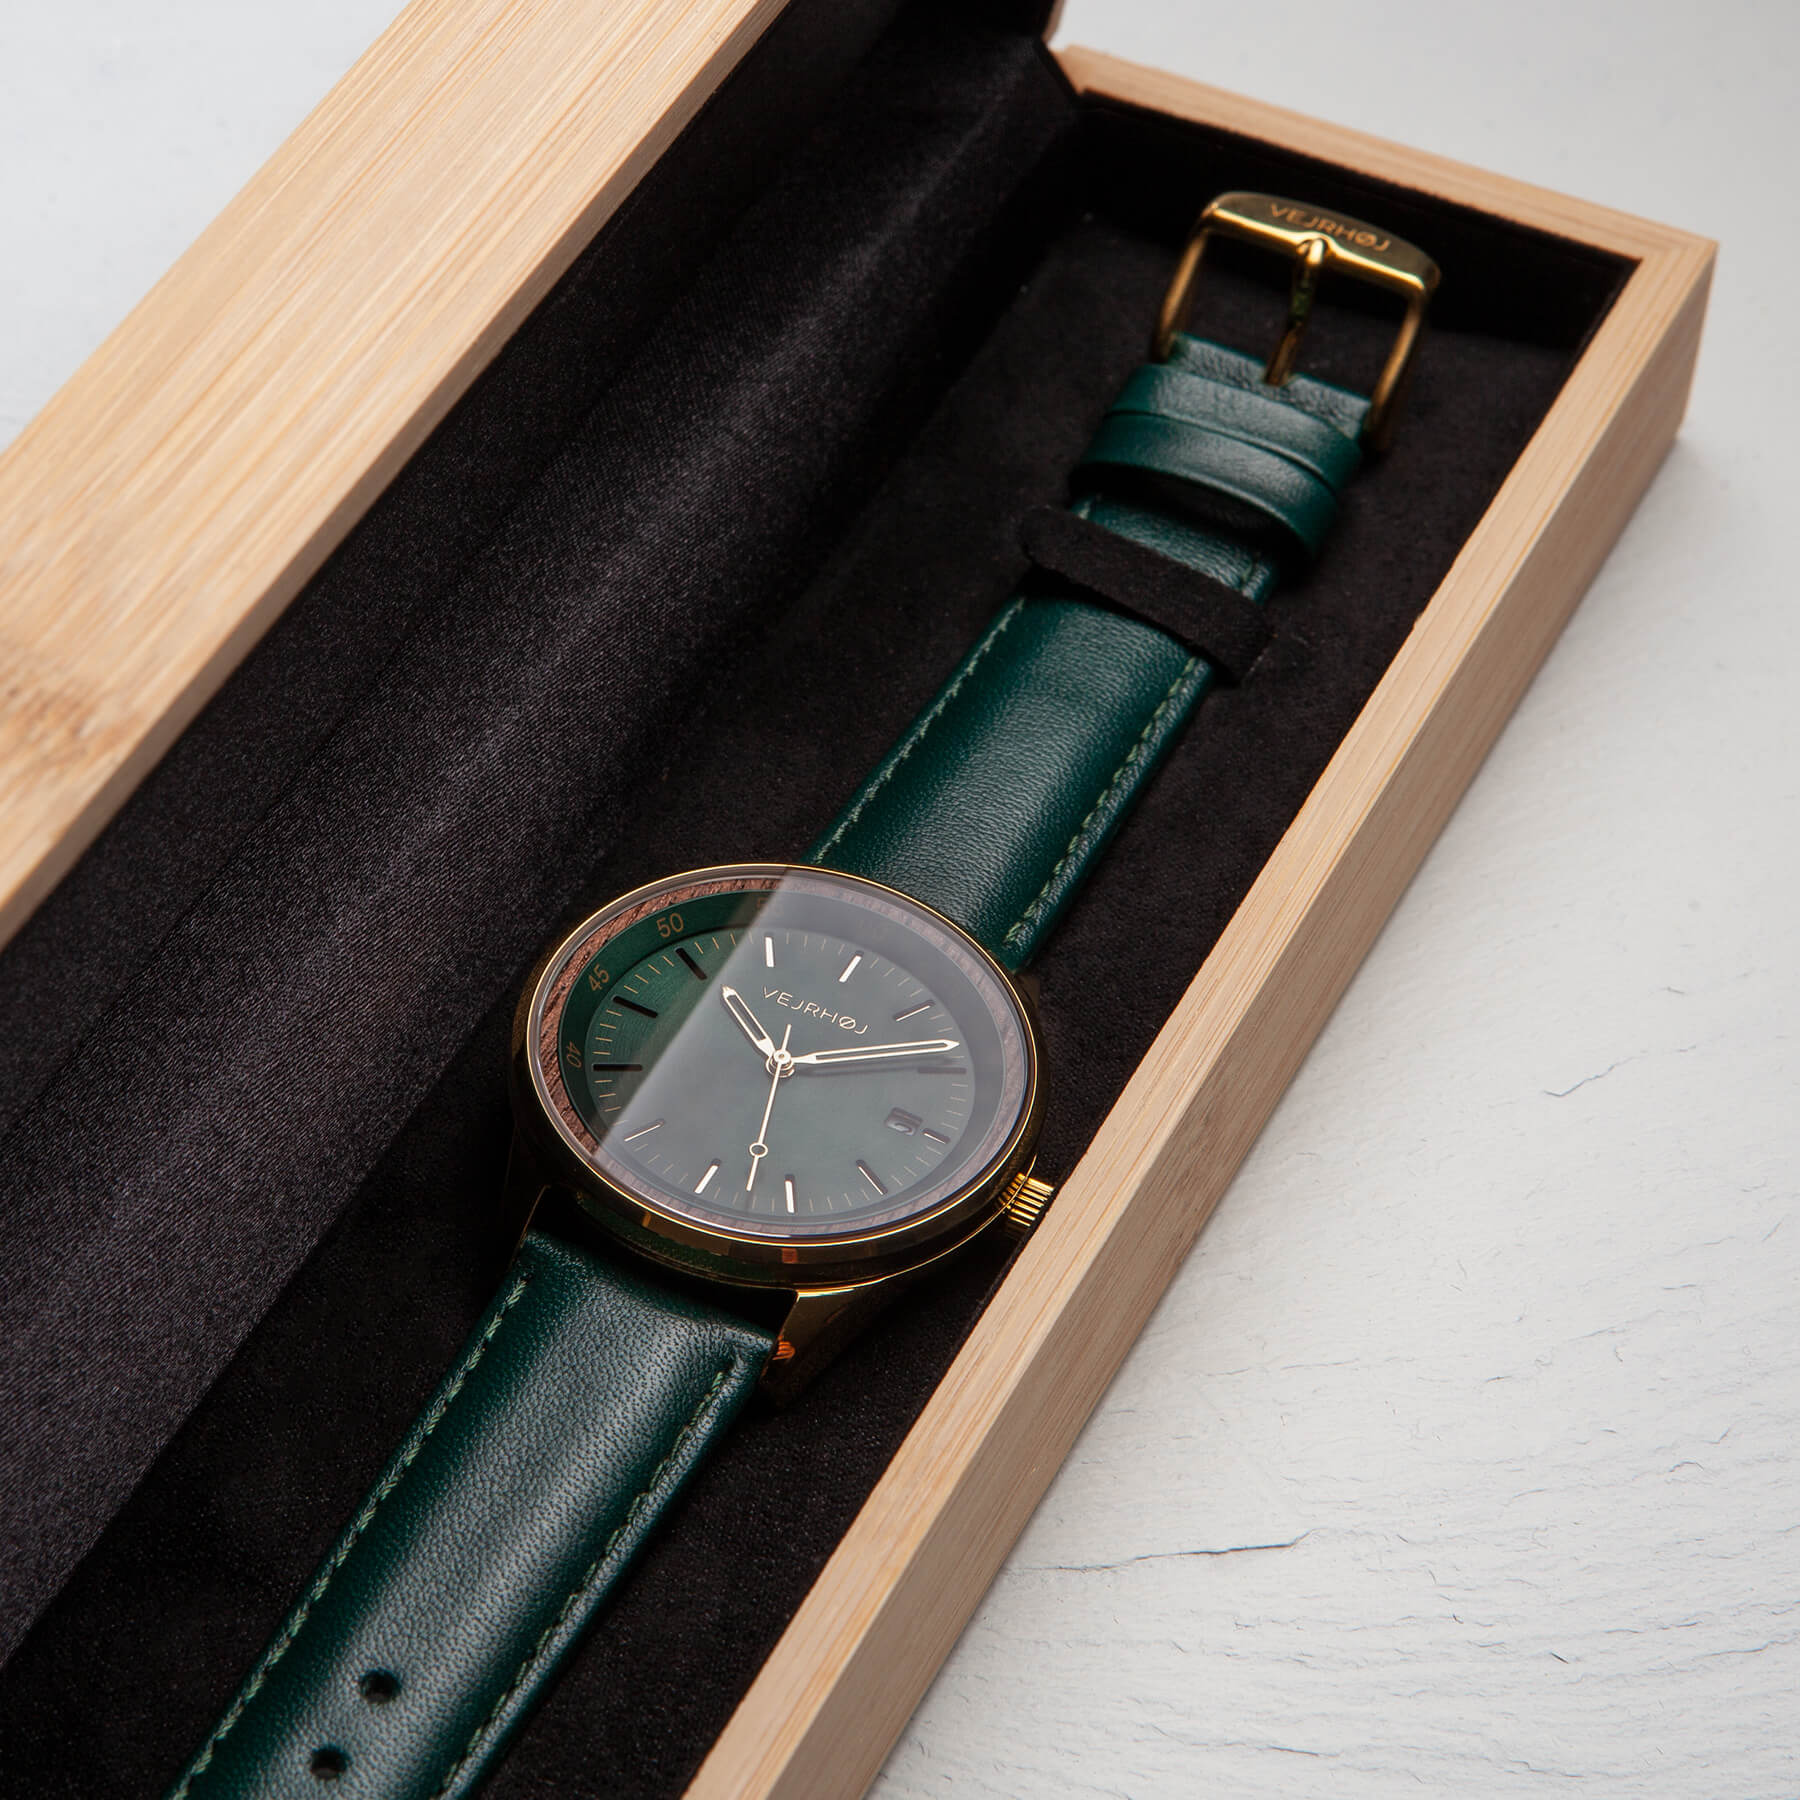 green automatic wrist watch with golden casing and green straps sitting inside the standard VEJRHOJ wooden box